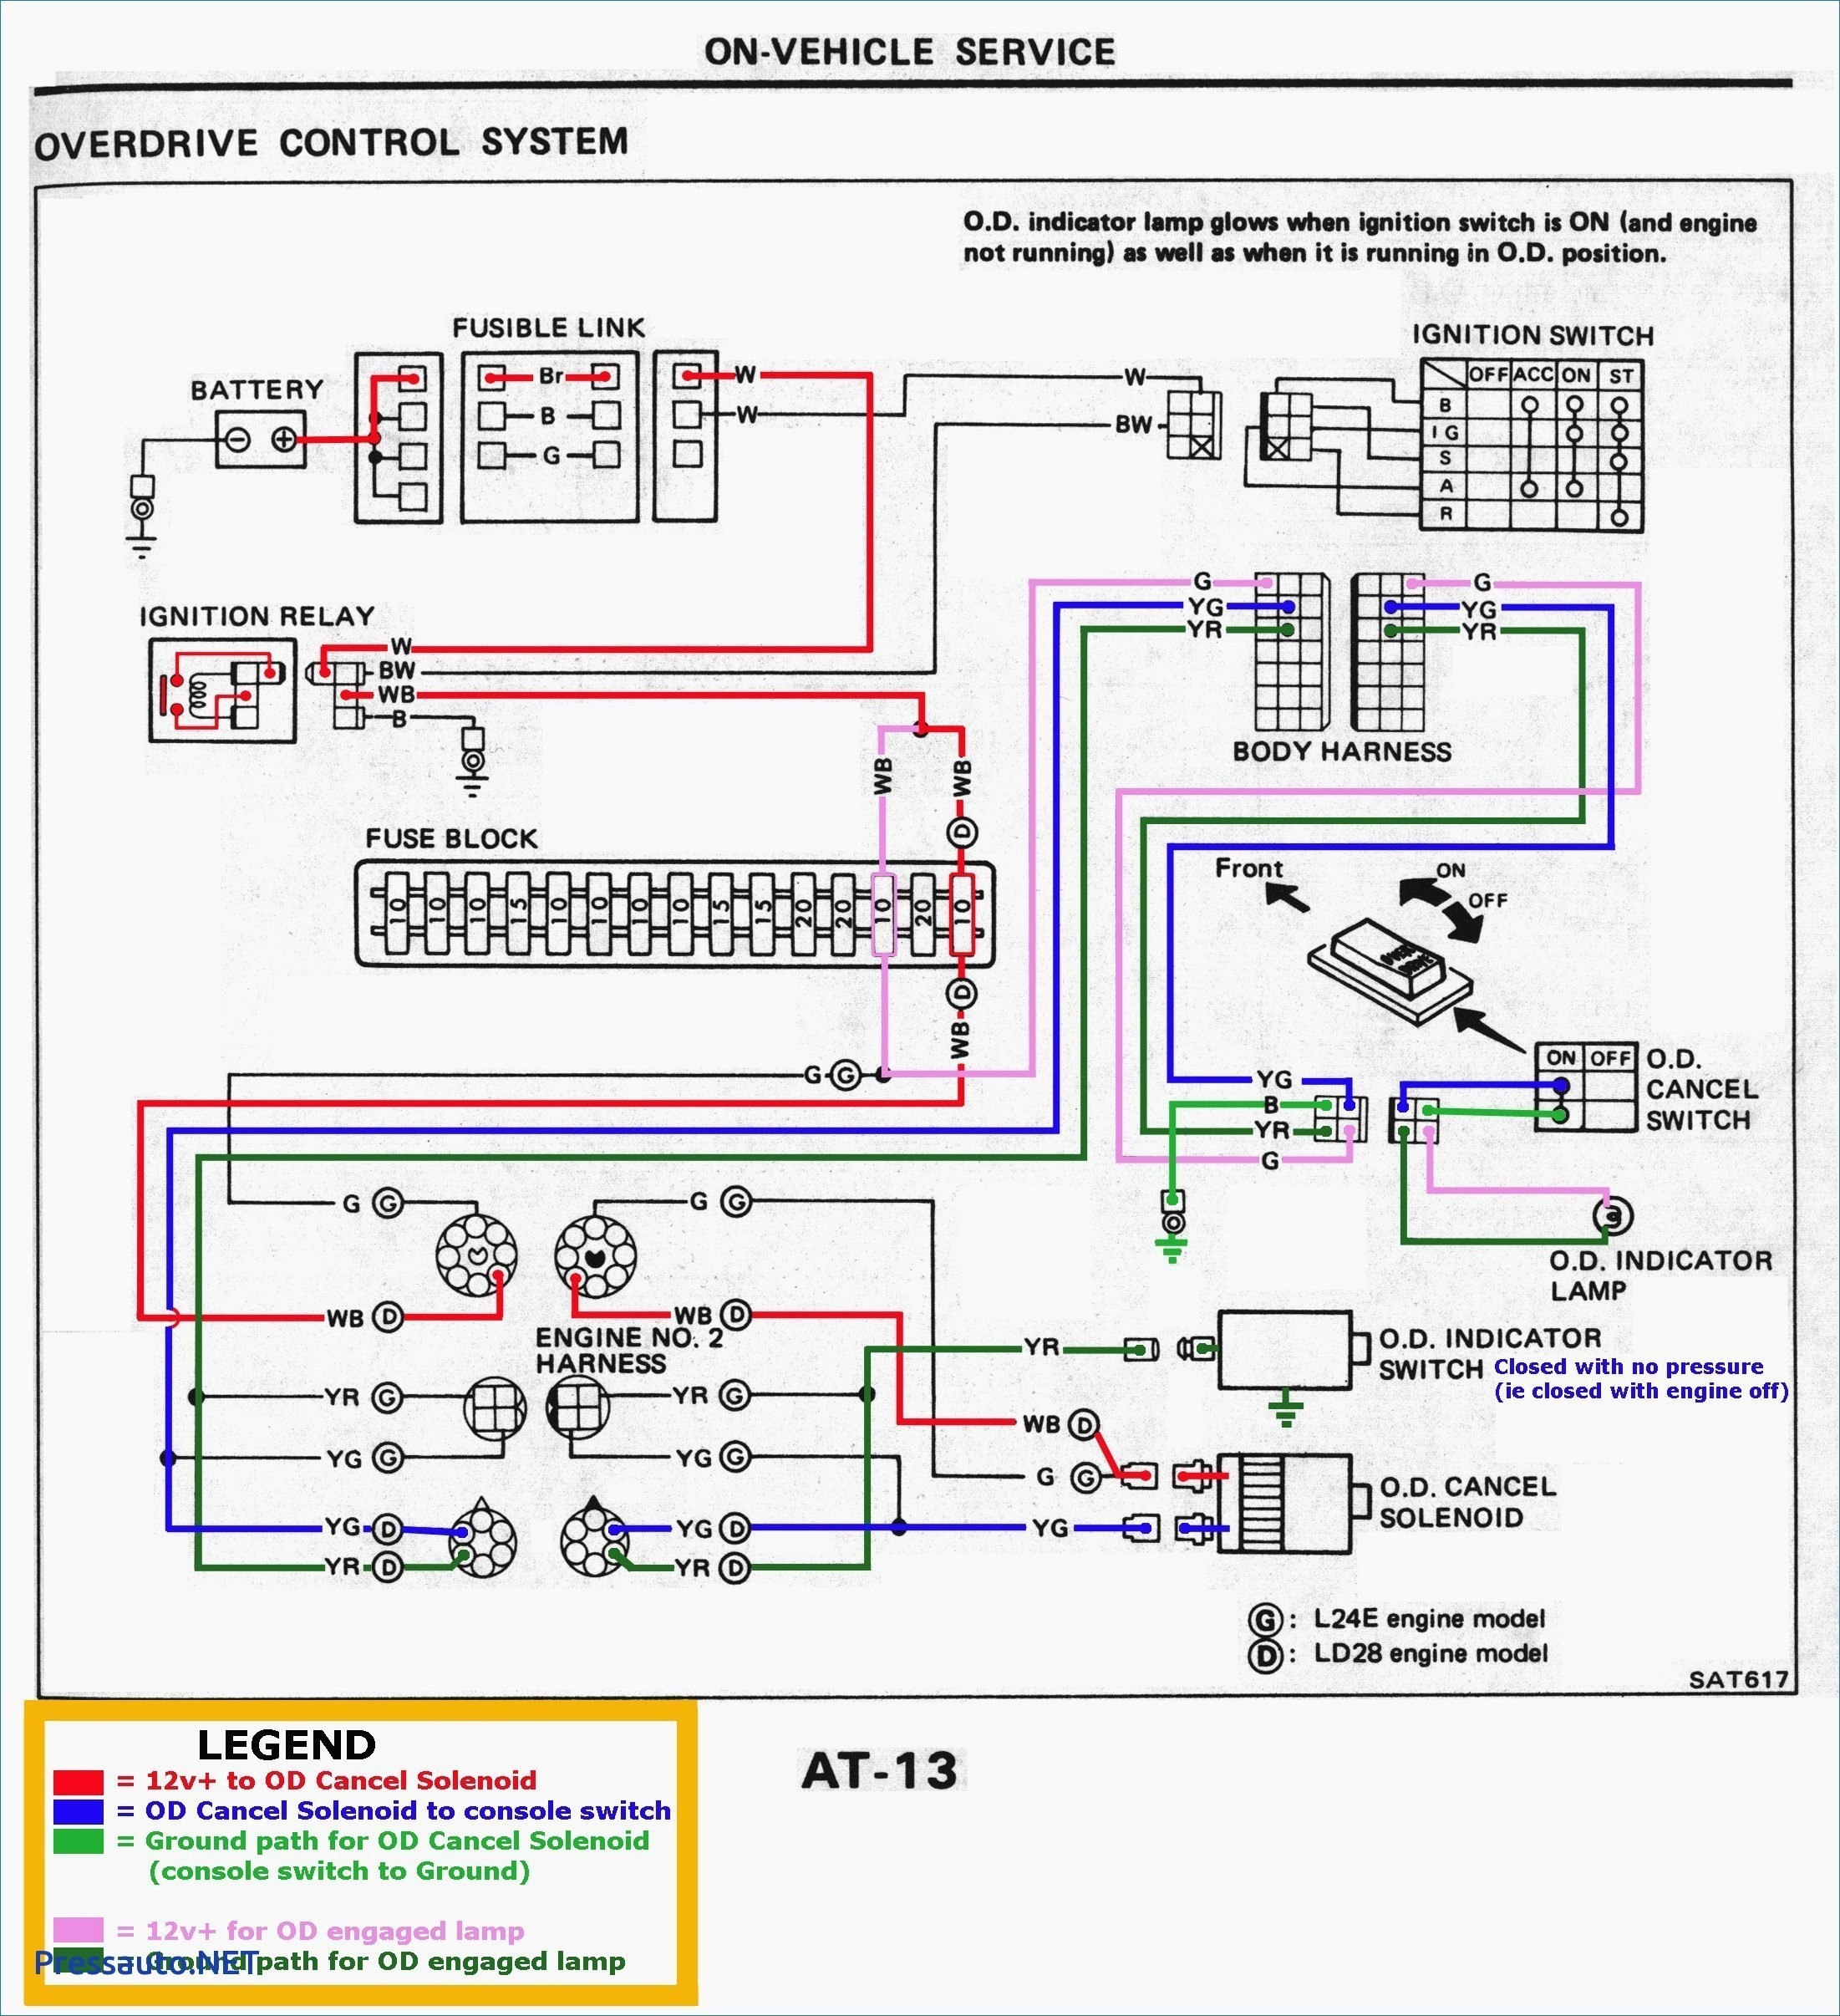 Wiring Diagram for Universal Ignition Switch Refrence Ignition Starter Switch Wiring Diagram Best Wiring Diagram for